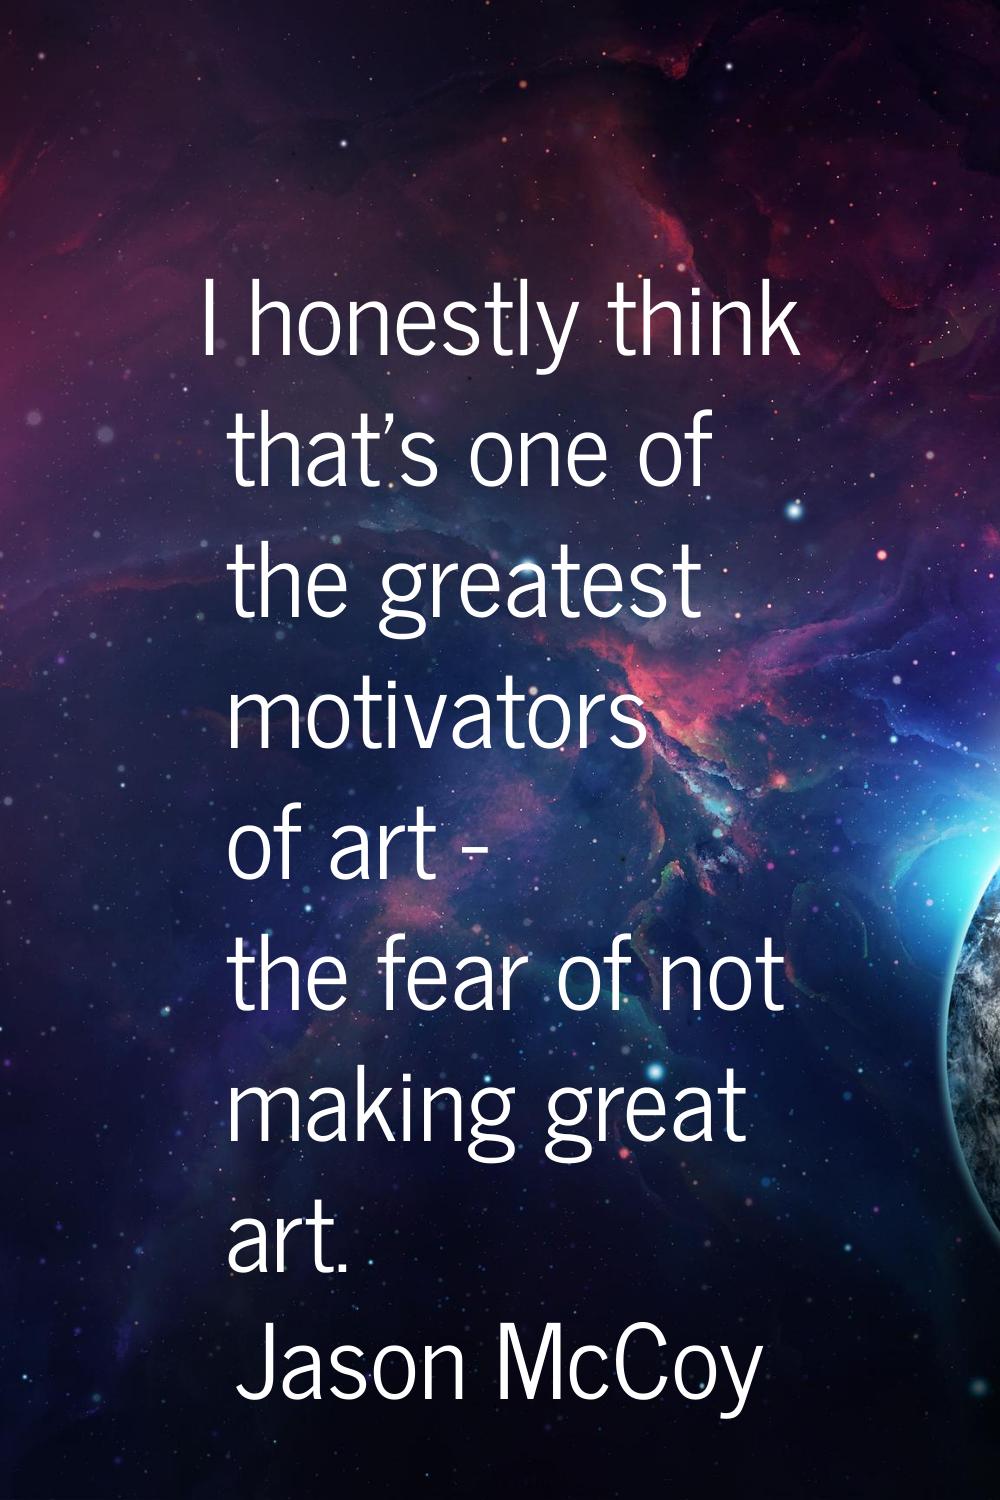 I honestly think that's one of the greatest motivators of art - the fear of not making great art.